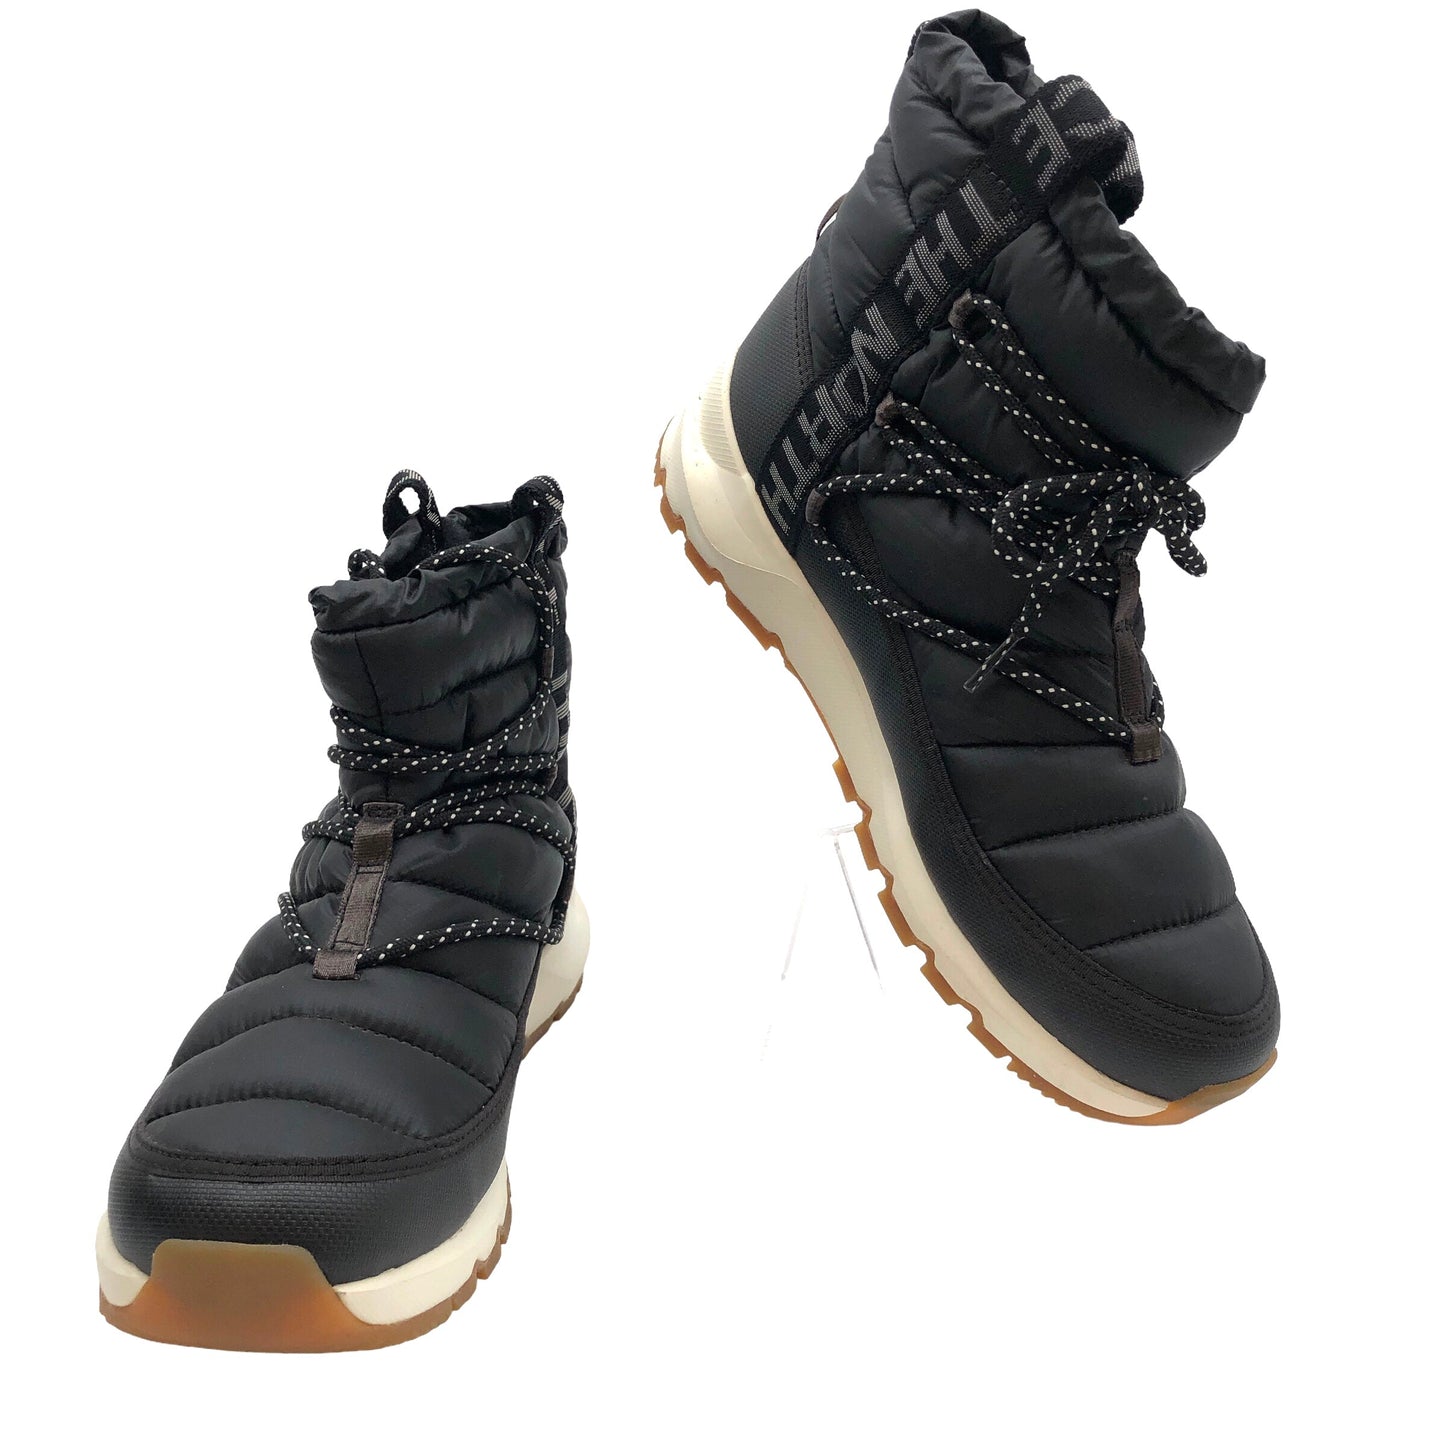 Black & Cream Boots Snow The North Face, Size 11